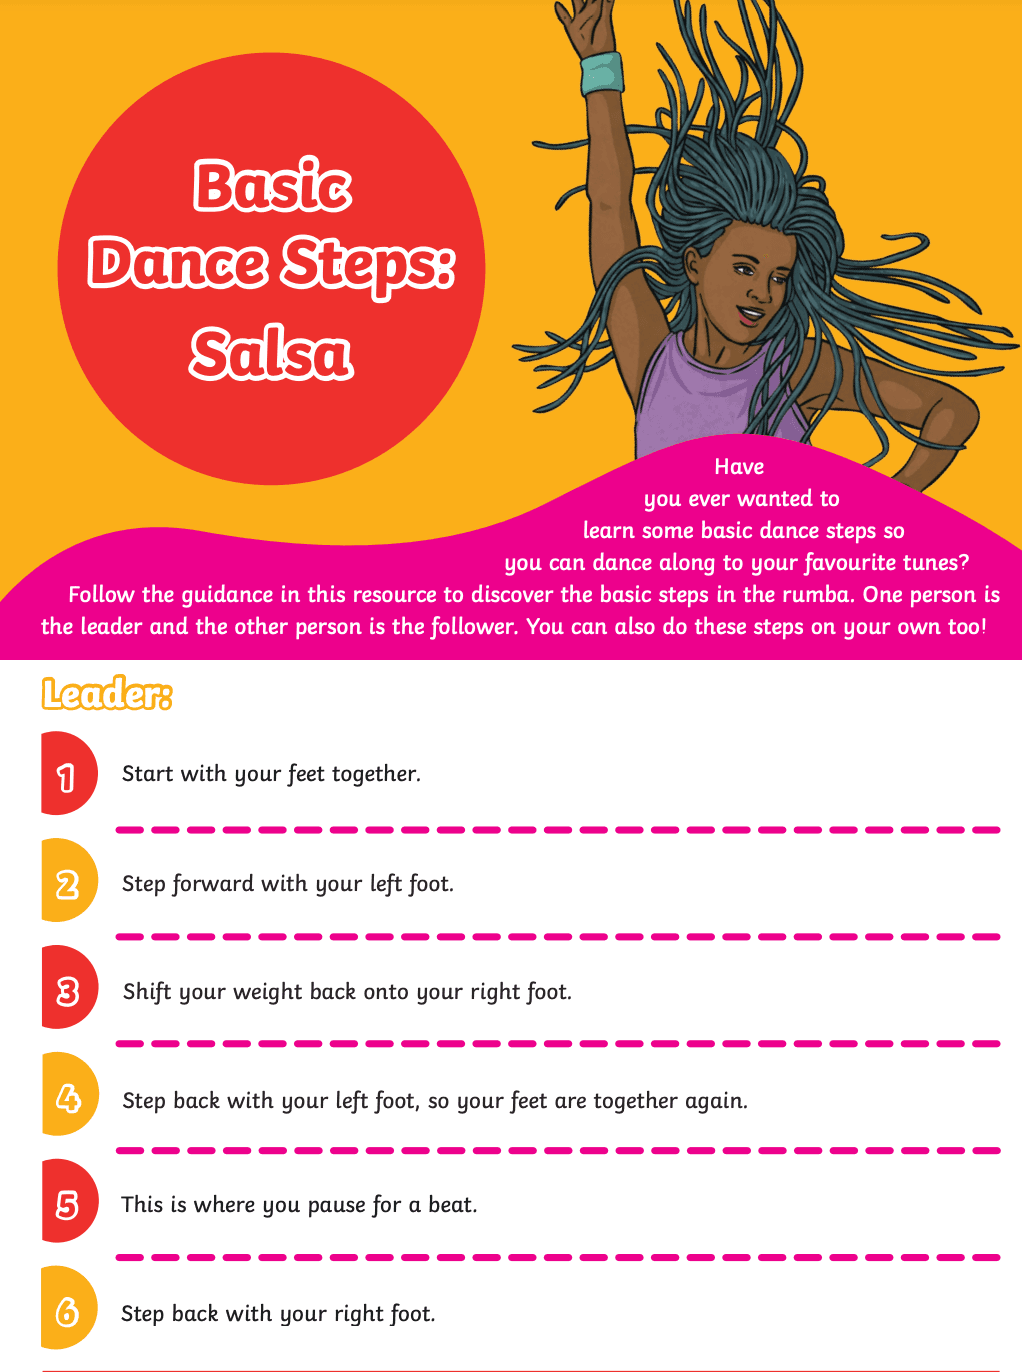 Salsa dancing basic steps. Download the whole lesson over here: